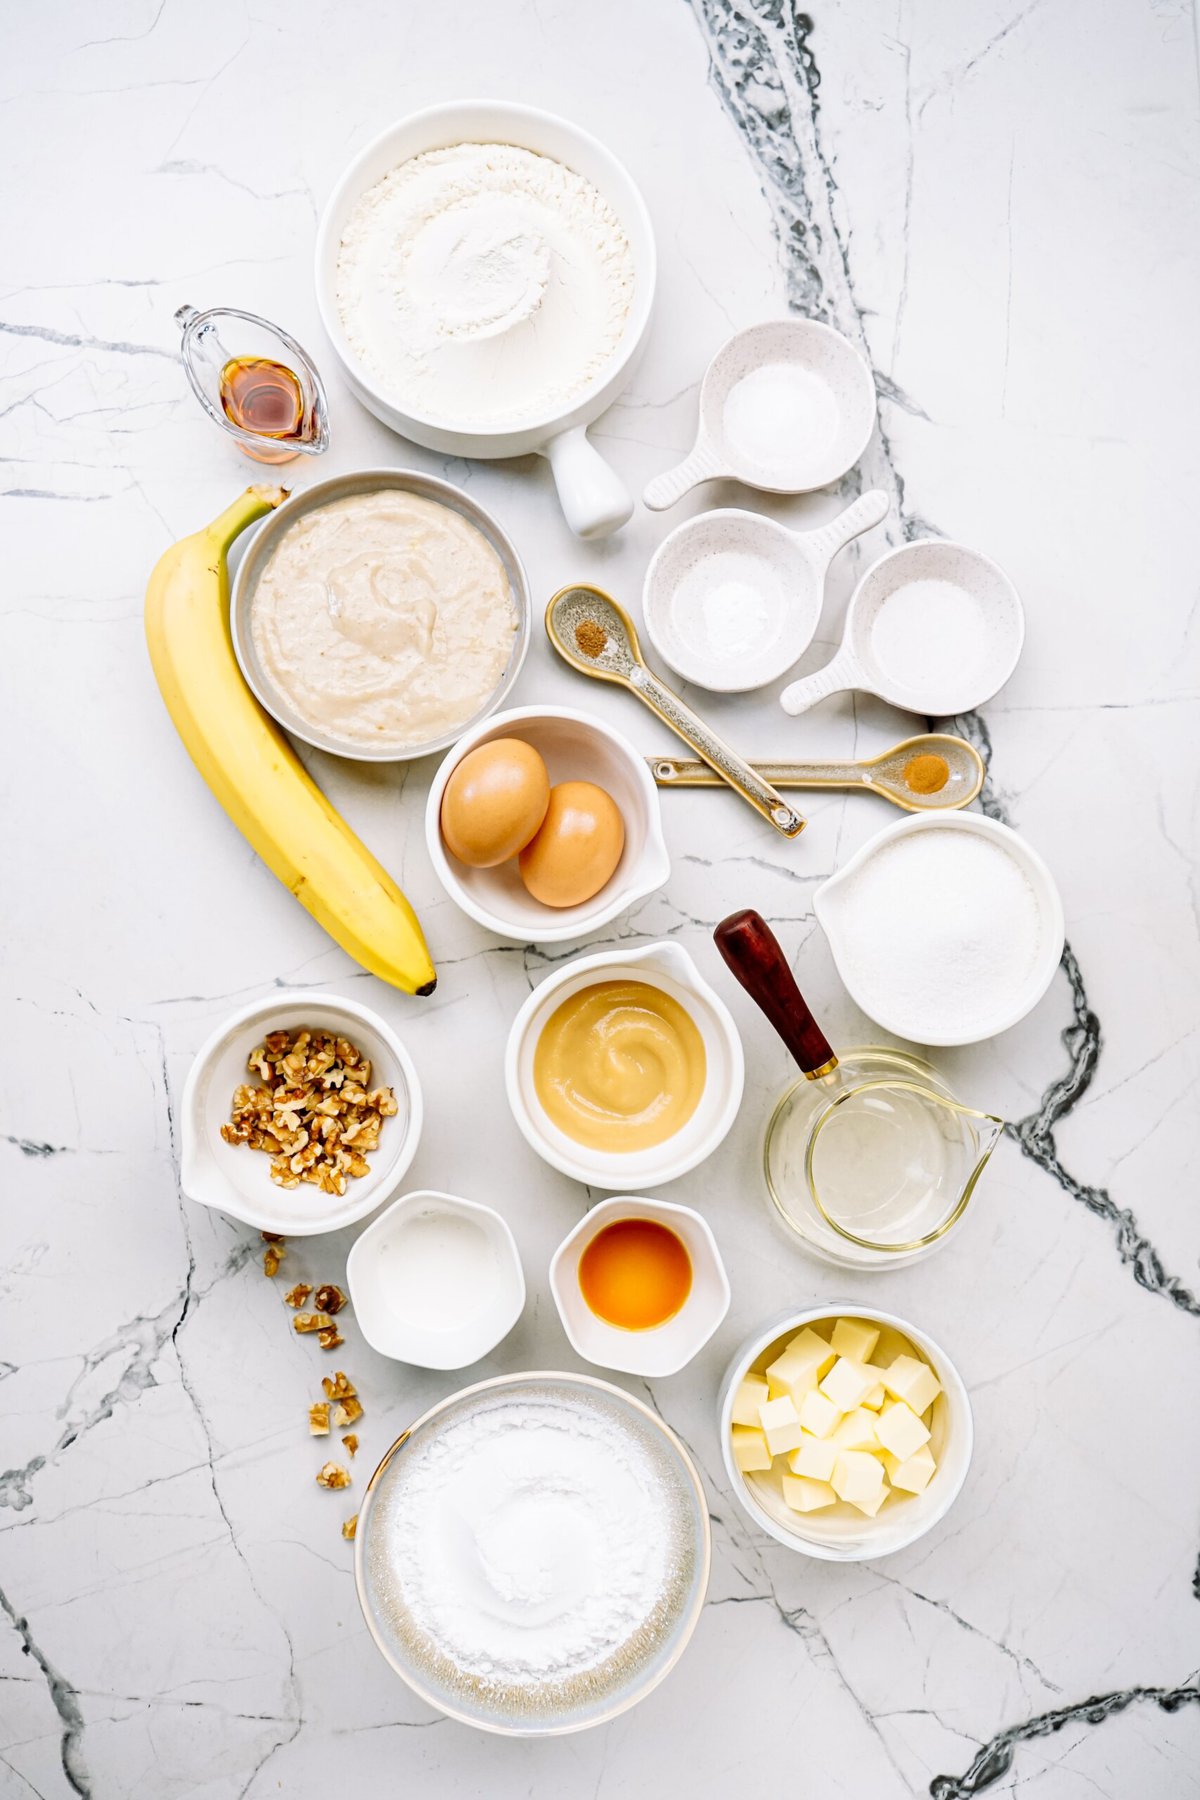 banana cake ingredients on a counter